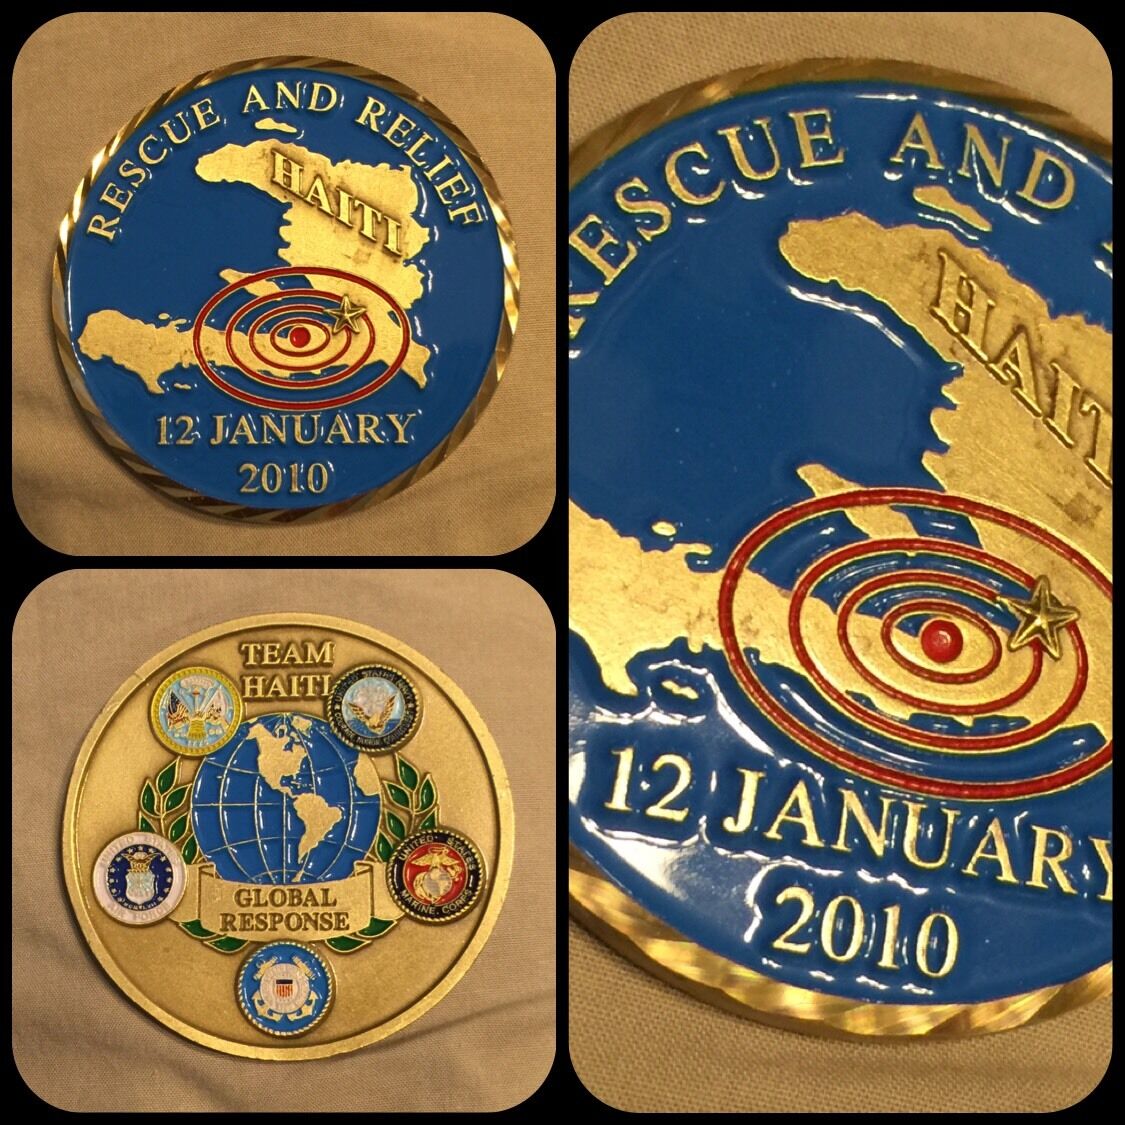 2010 TEAM HAITI RESCUE & RELIEF Global Response EARTHQUAKE 50mm CHALLENGE COIN